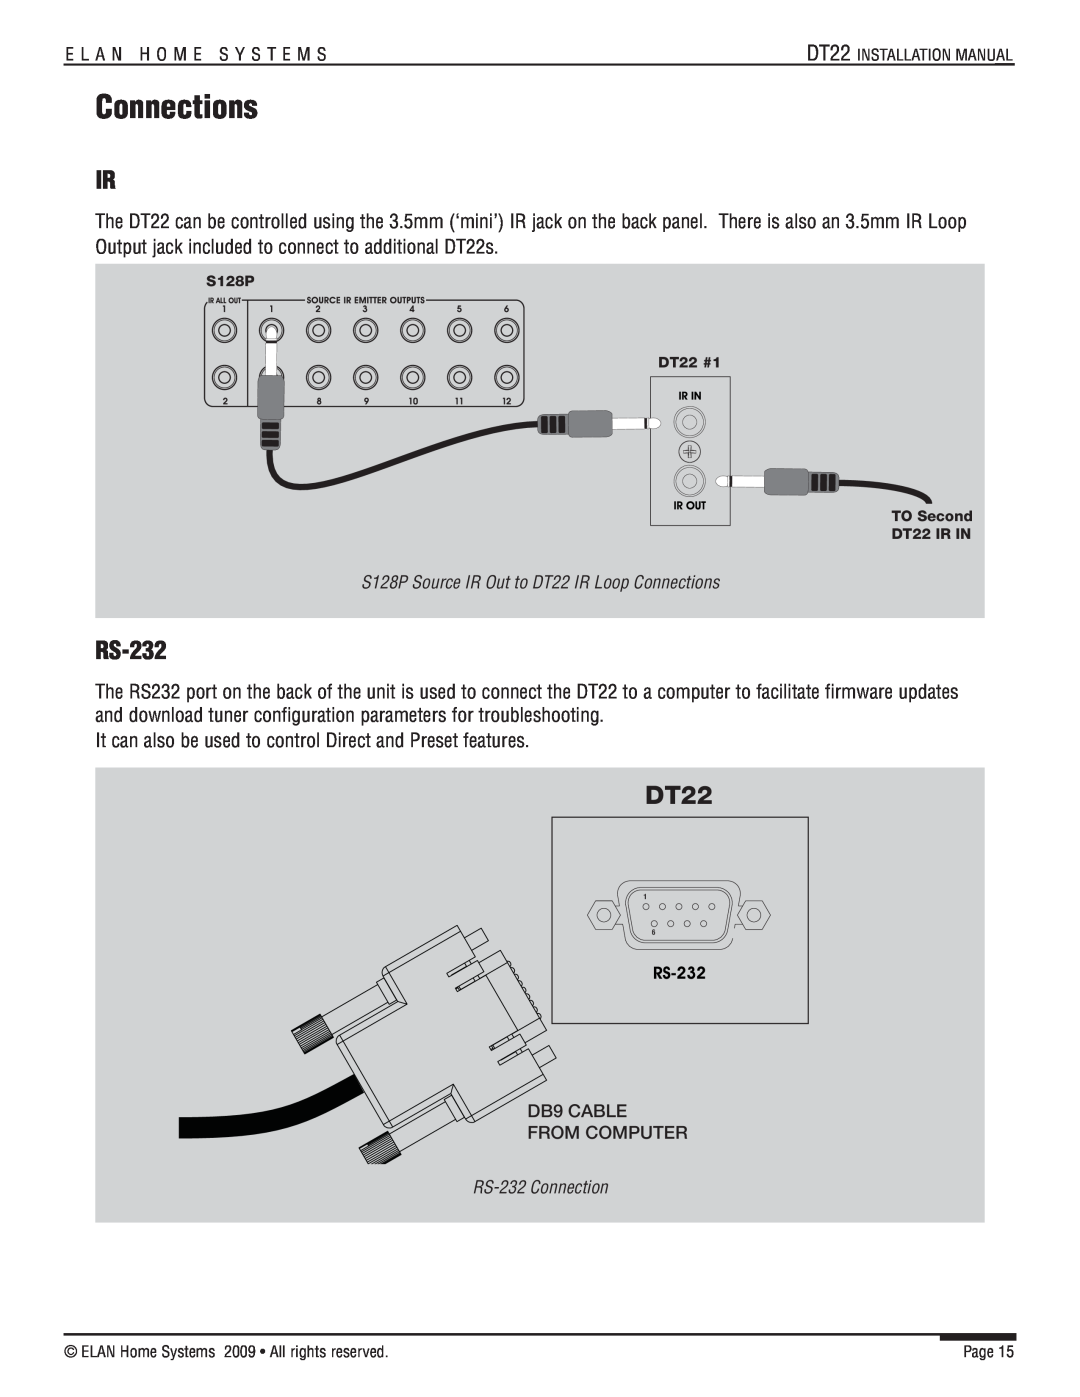 ELAN Home Systems DT22 manual Connections, RS-232 